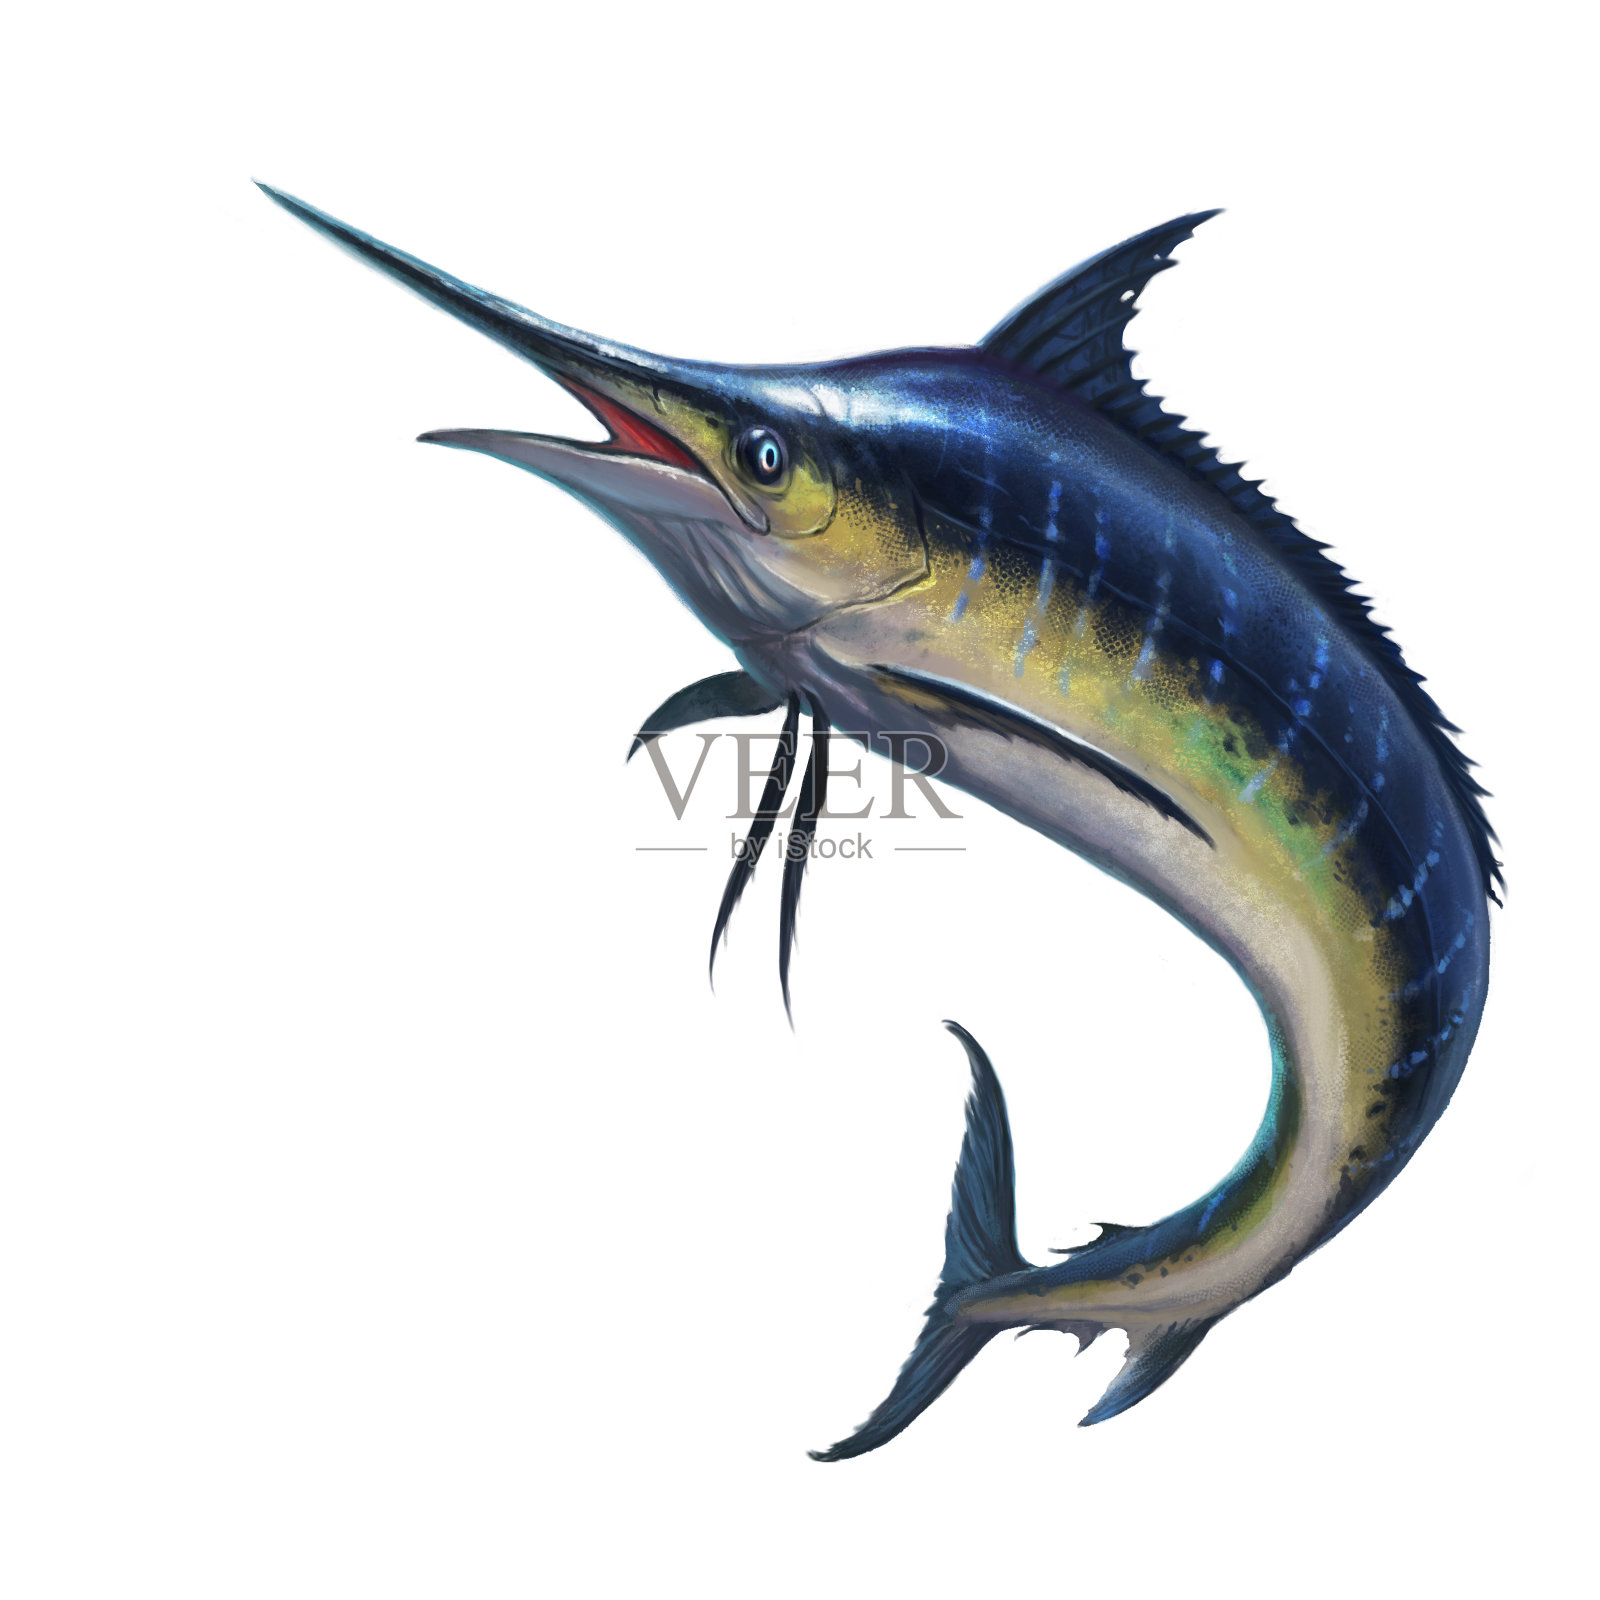 Atlantic White Marlin Information and Picture | Sea Animals